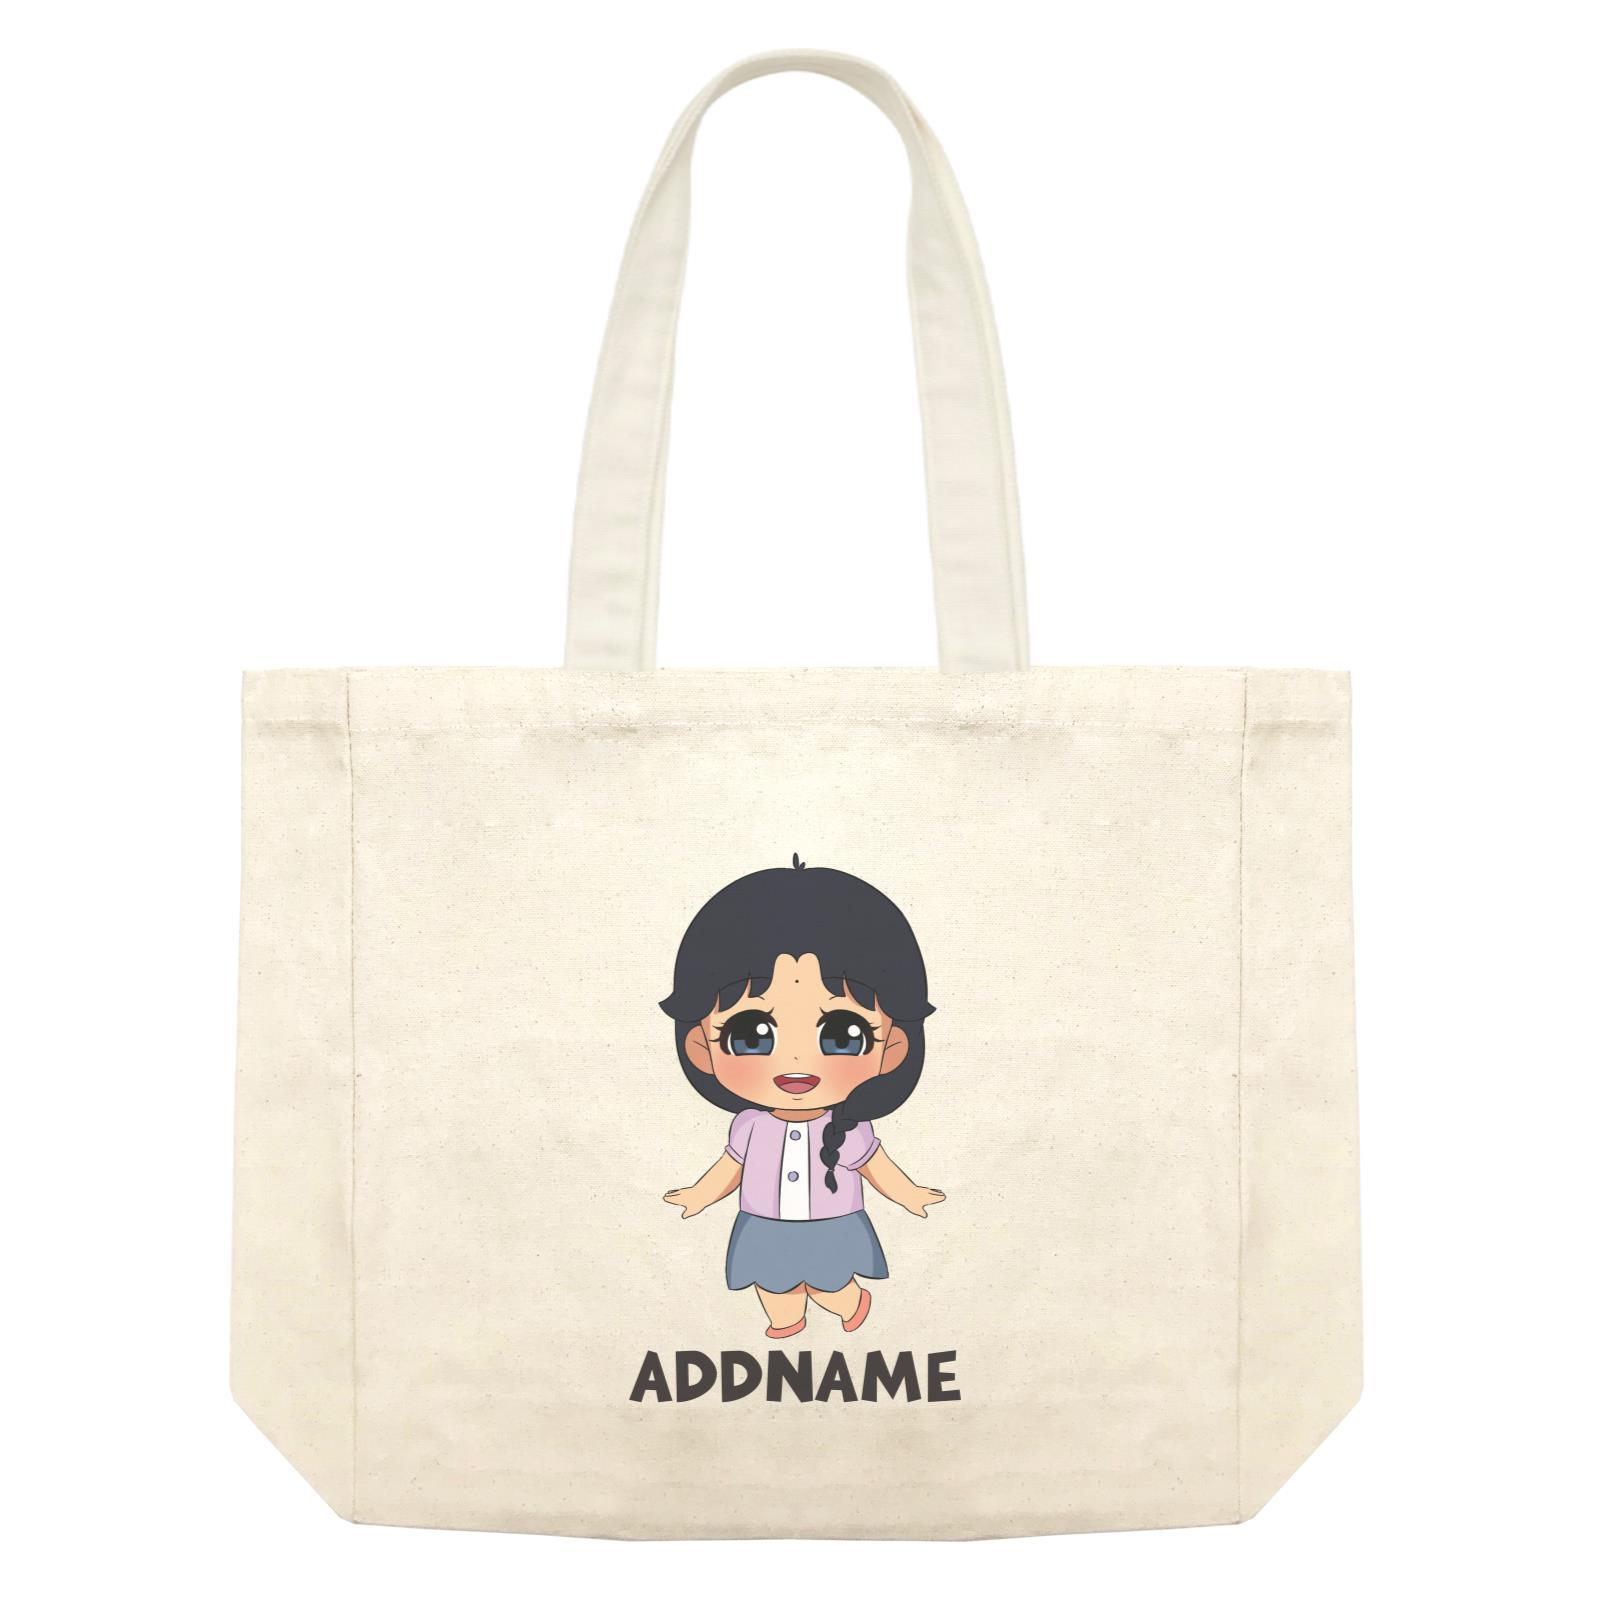 Children's Day Gift Series Little Indian Girl Addname Shopping Bag